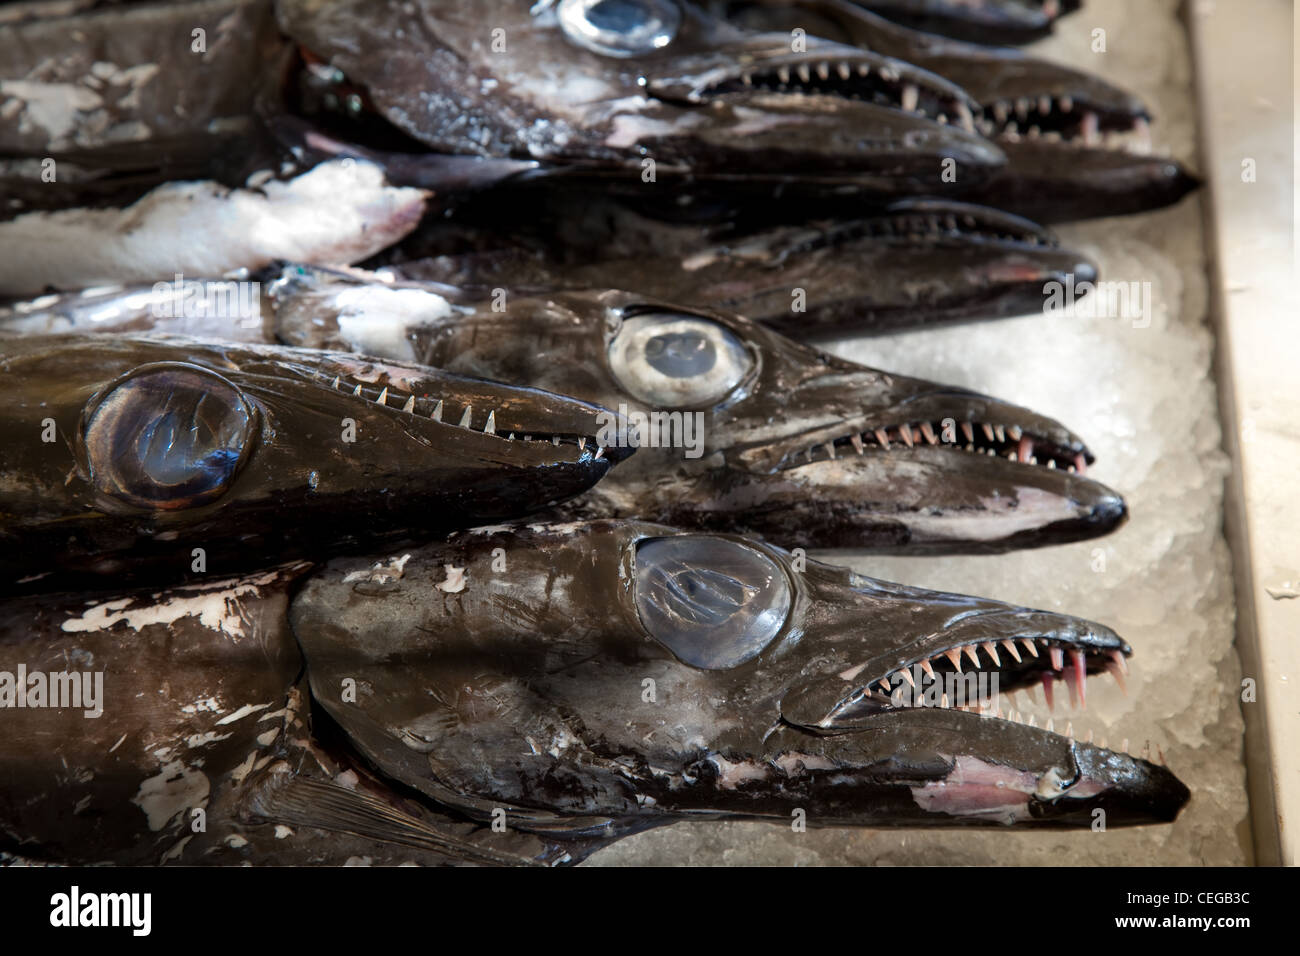 Black Espada or Black Scabbard fish on crushed ice at the Funchal fish market in Madeira. Portugal Stock Photo